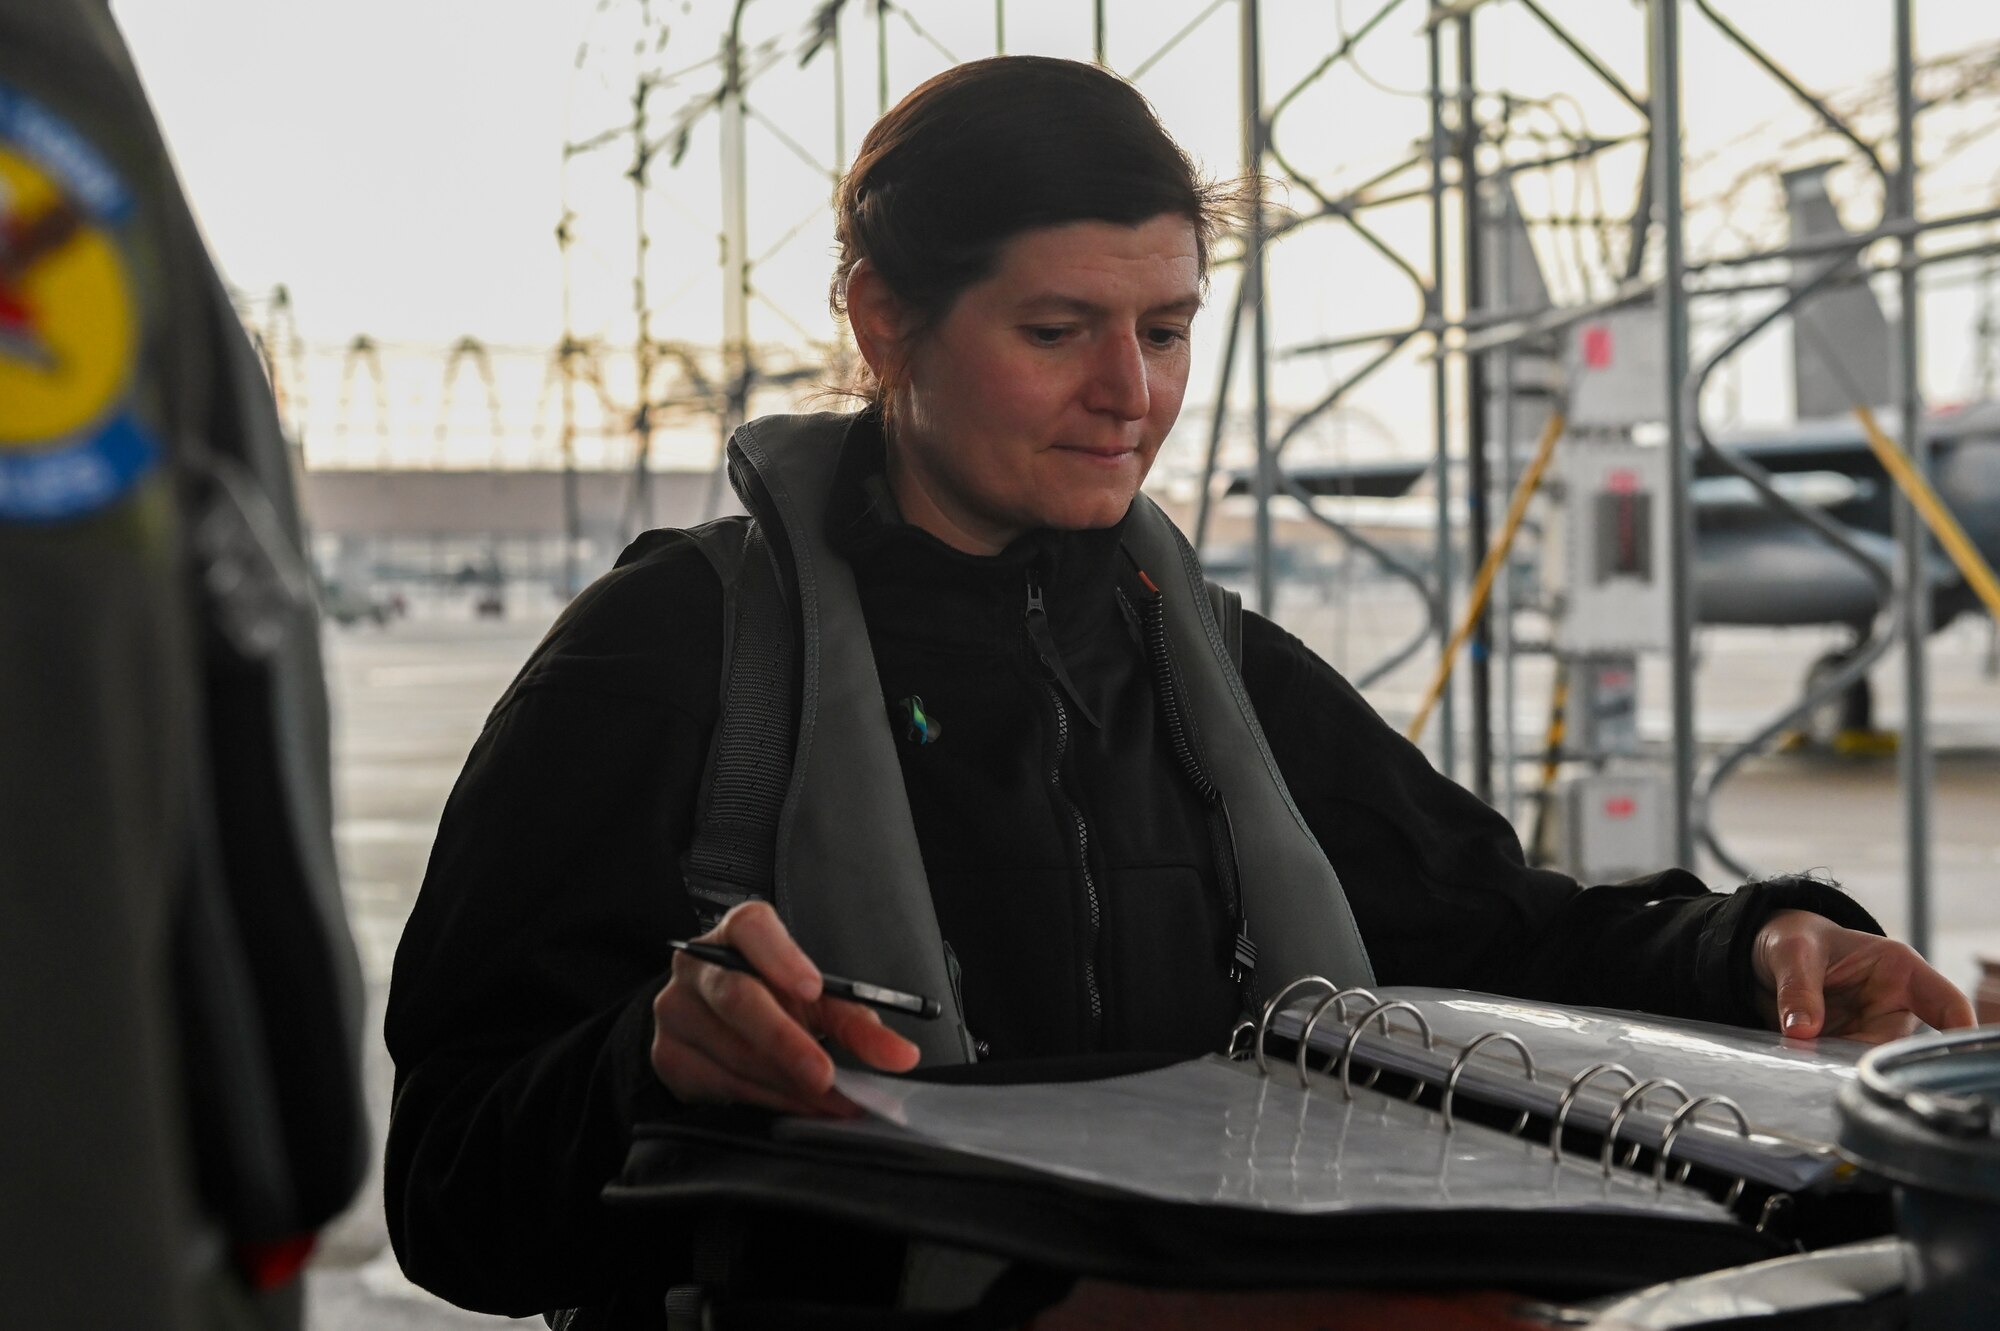 Lt. Col. Bridgett “Atlas” Fitzsimmons, 334th Fighter Squadron director of operations, inspects an aircraft log before a flight at Seymour Johnson Air Force Base, North Carolina, Jan. 5, 2022.